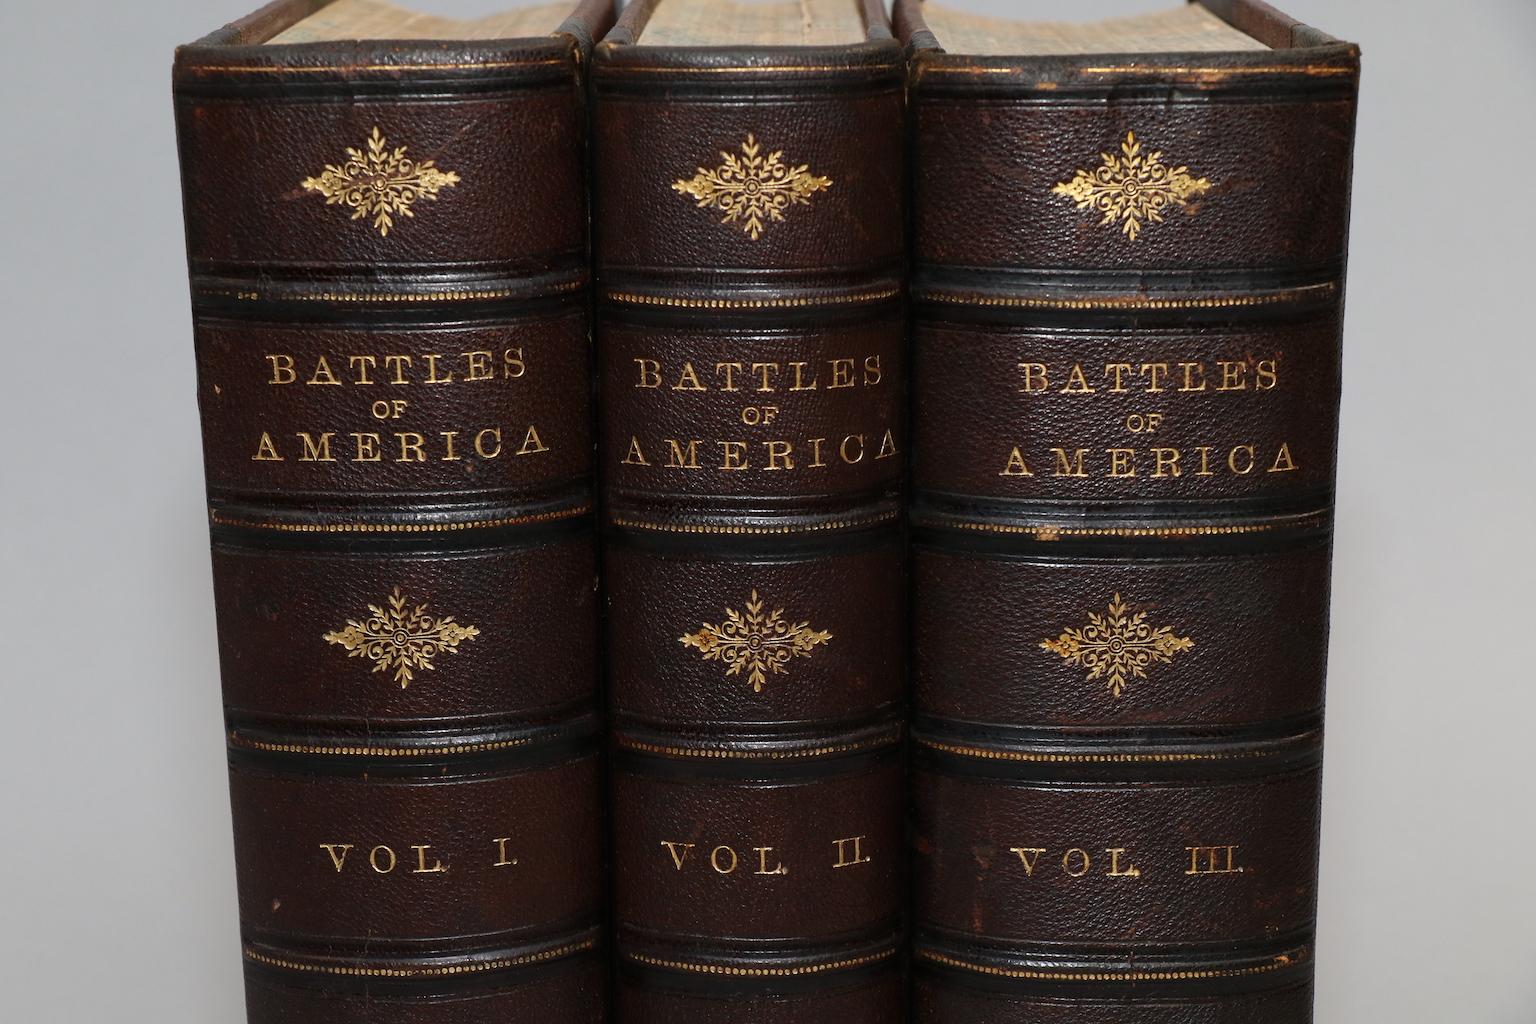 3 volumes. Large thick quartos. First Edition! Bound in 3/4 brown Morocco with marbled edges, raised bands, and gilt panels on spine. Includes biographies of multiple naval and military commanders. Also features numerous steel engravings throughout.